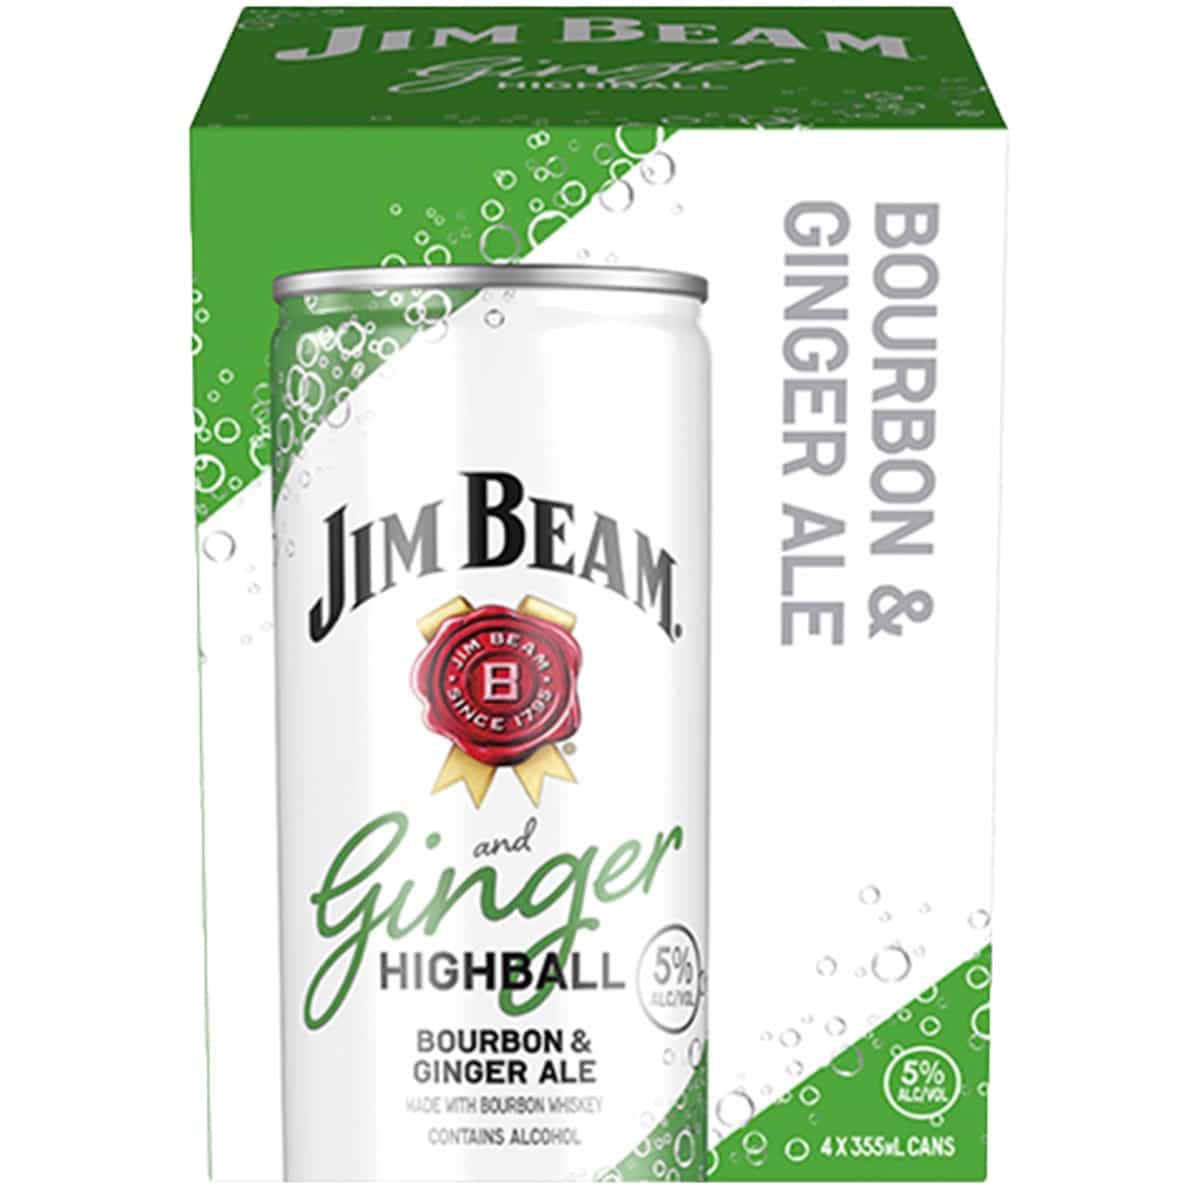 Jim Beam Ginger Highball Ready to Drink Canned Cocktail - Barbank